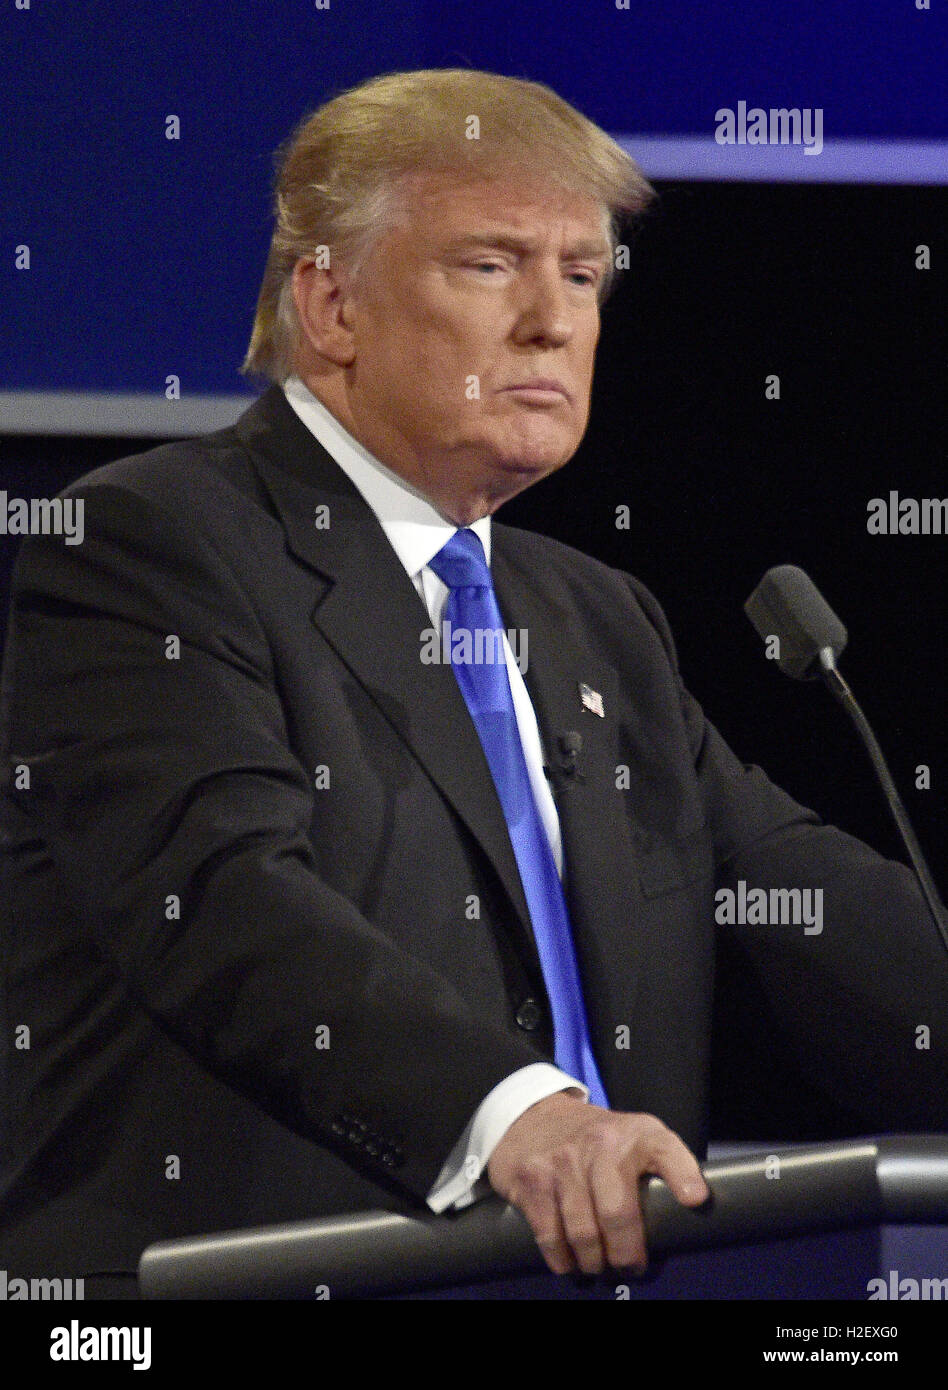 Hempstead, New York, USA. 26th Sep, 2016. Businessman Donald J. Trump, the Republican Party nominee for President of the United States, makes a point as he appears with former US Secretary of State Hillary Clinton, the Democratic Party nominee for President of the US in the first of three presidential general election debates at Hofstra University in Hempstead, New York on Monday, September 26, 2016.Credit: Ron Sachs/CNP. Credit:  Ron Sachs/CNP/ZUMA Wire/Alamy Live News Stock Photo